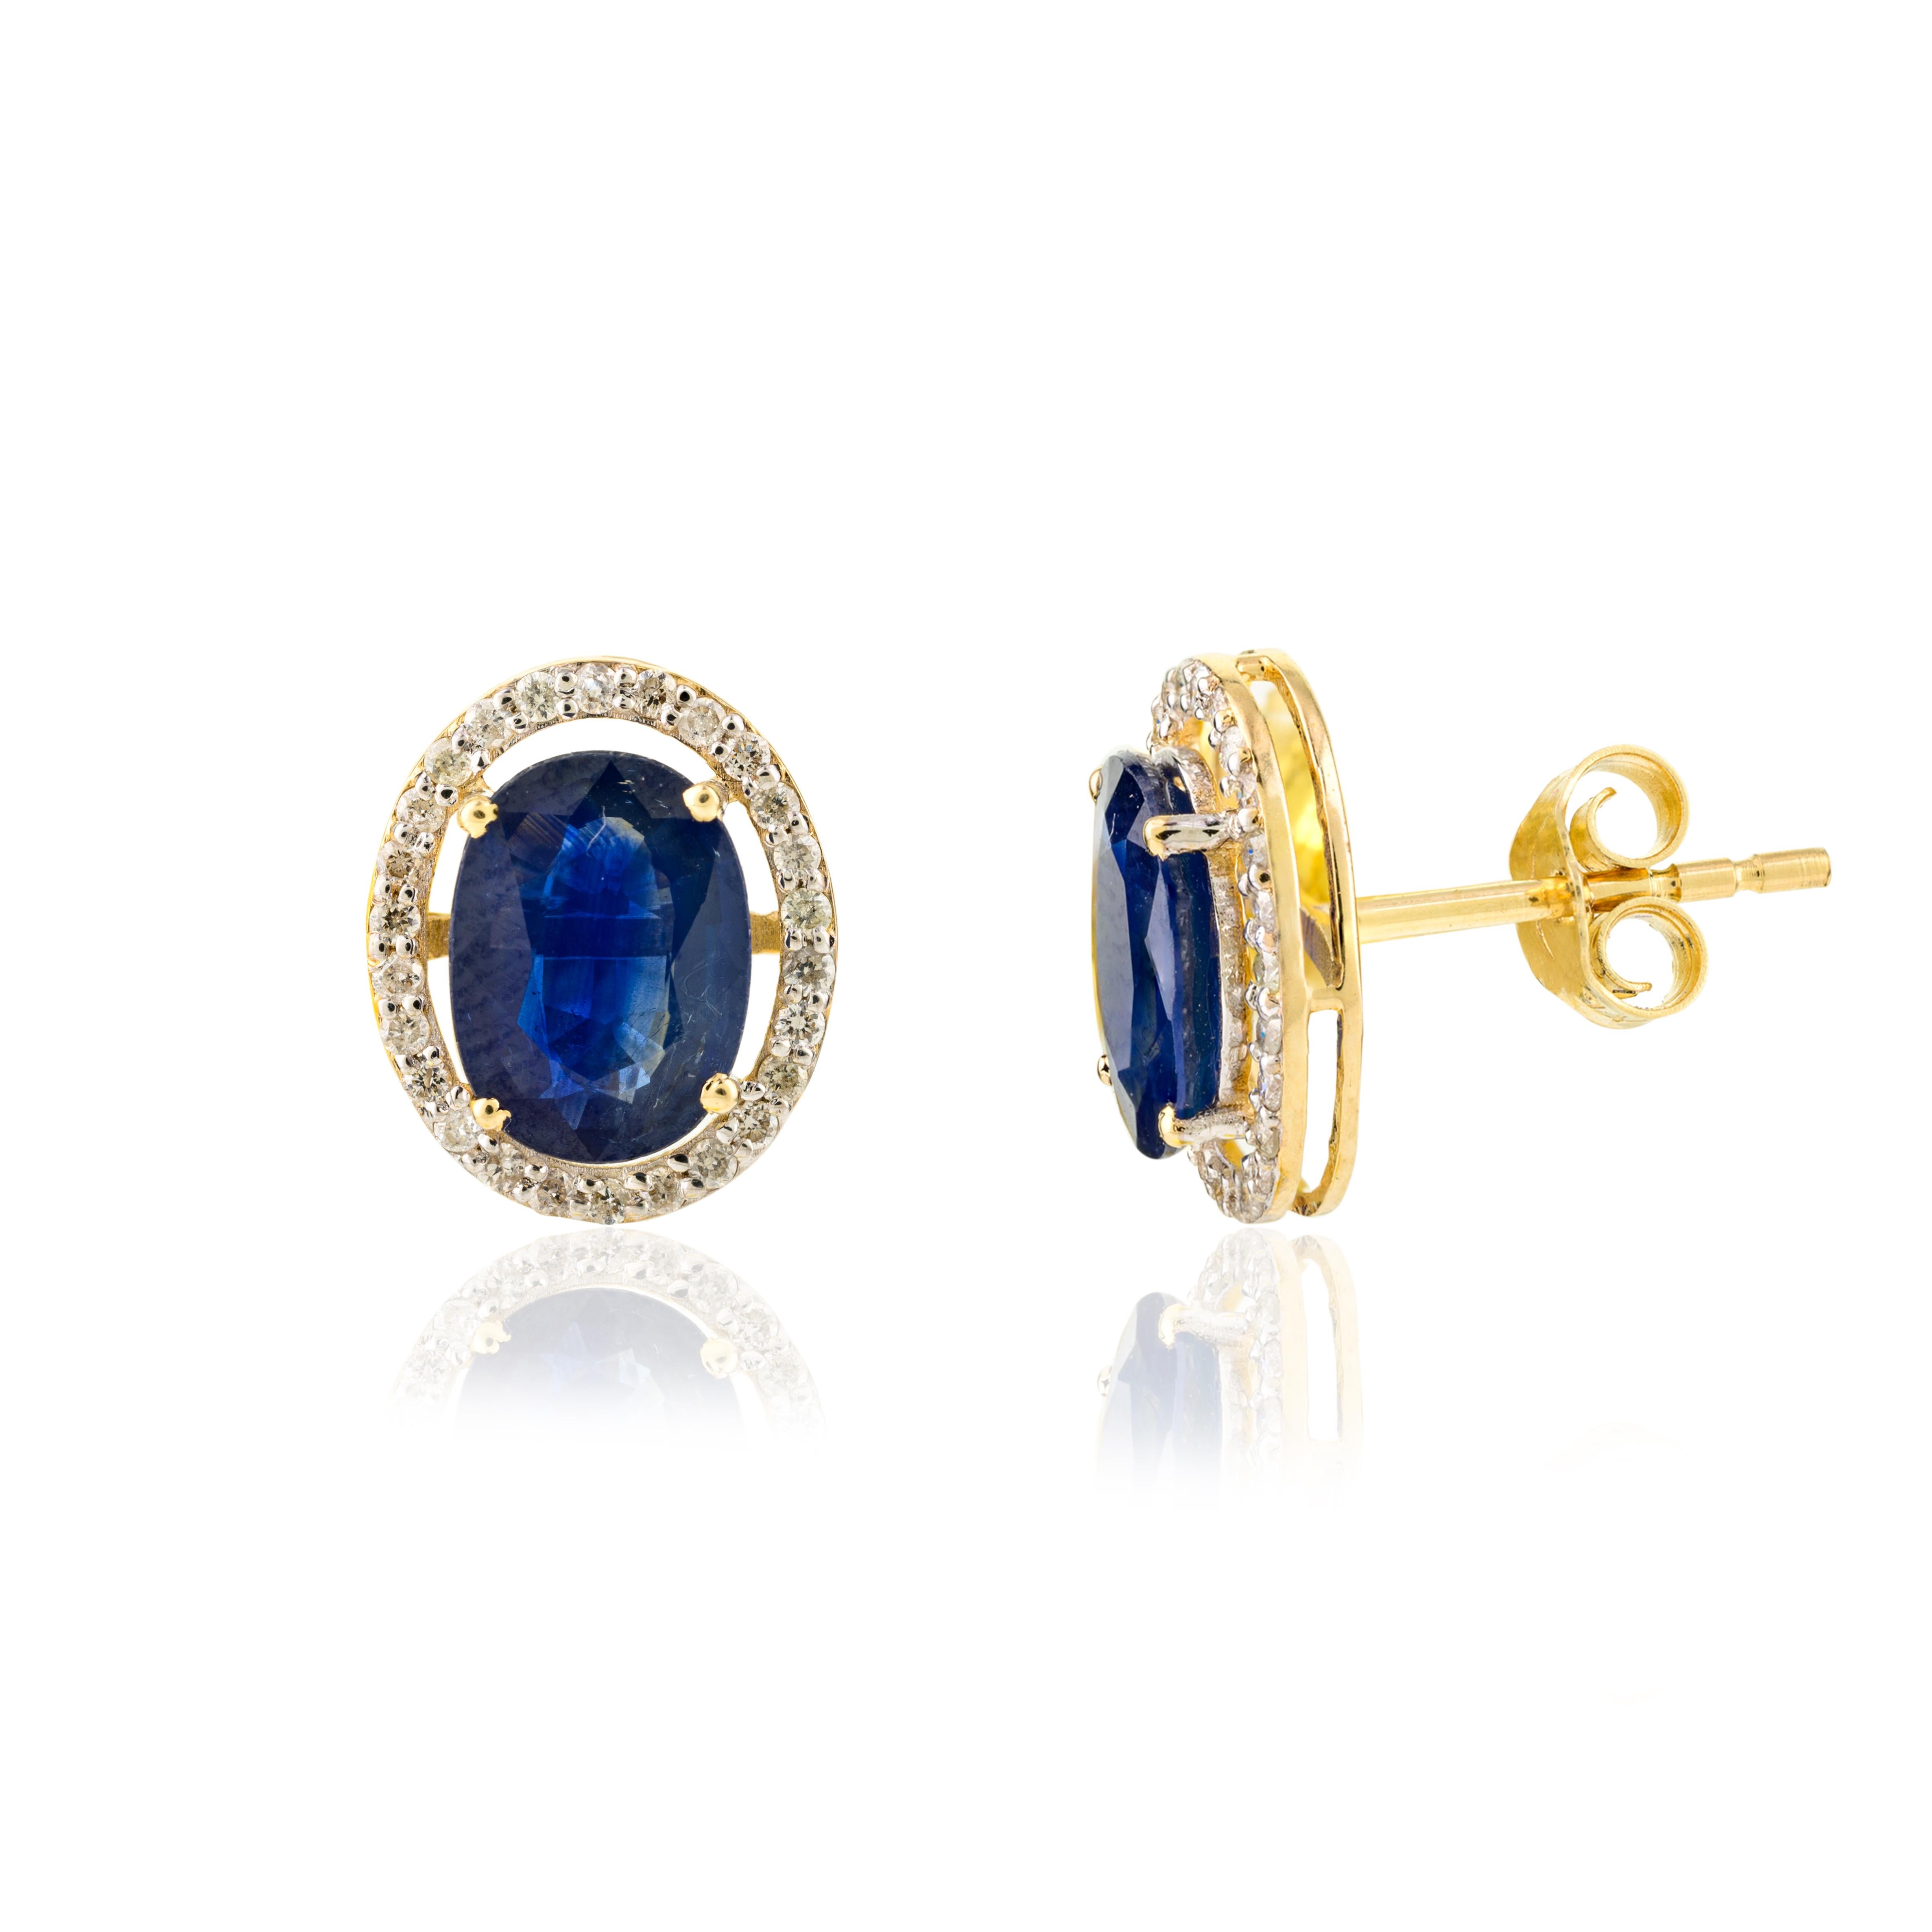 Deep Blue Sapphire Diamond Halo Stud Earrings in 14k Solid Yellow Gold In New Condition For Sale In Houston, TX